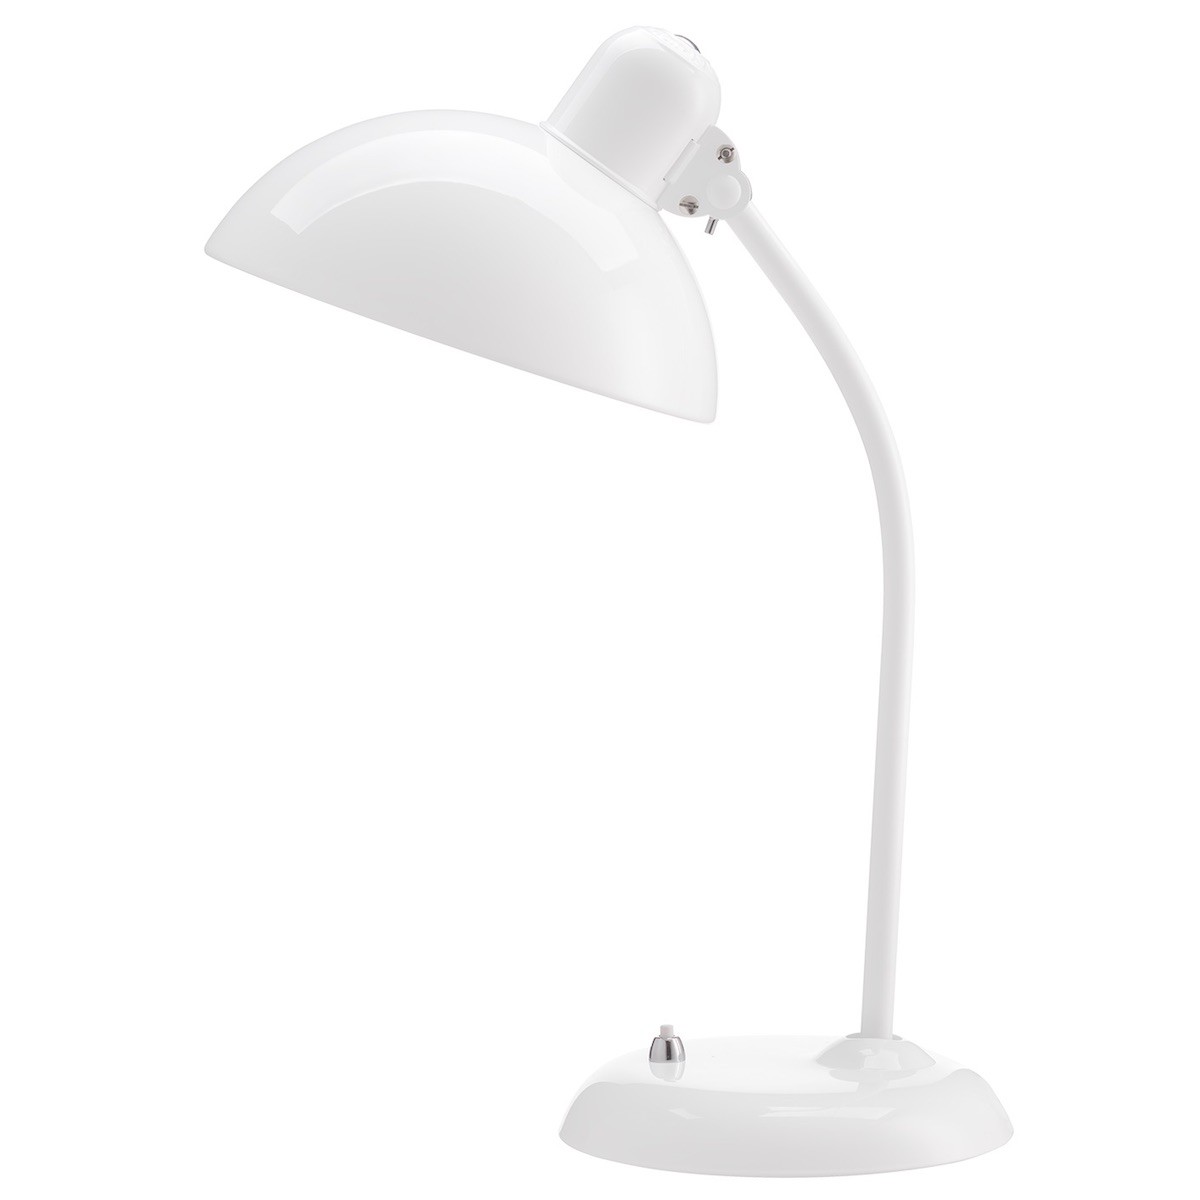 blanc - inclinable - lampe de table Kaiser idell - 6556-T